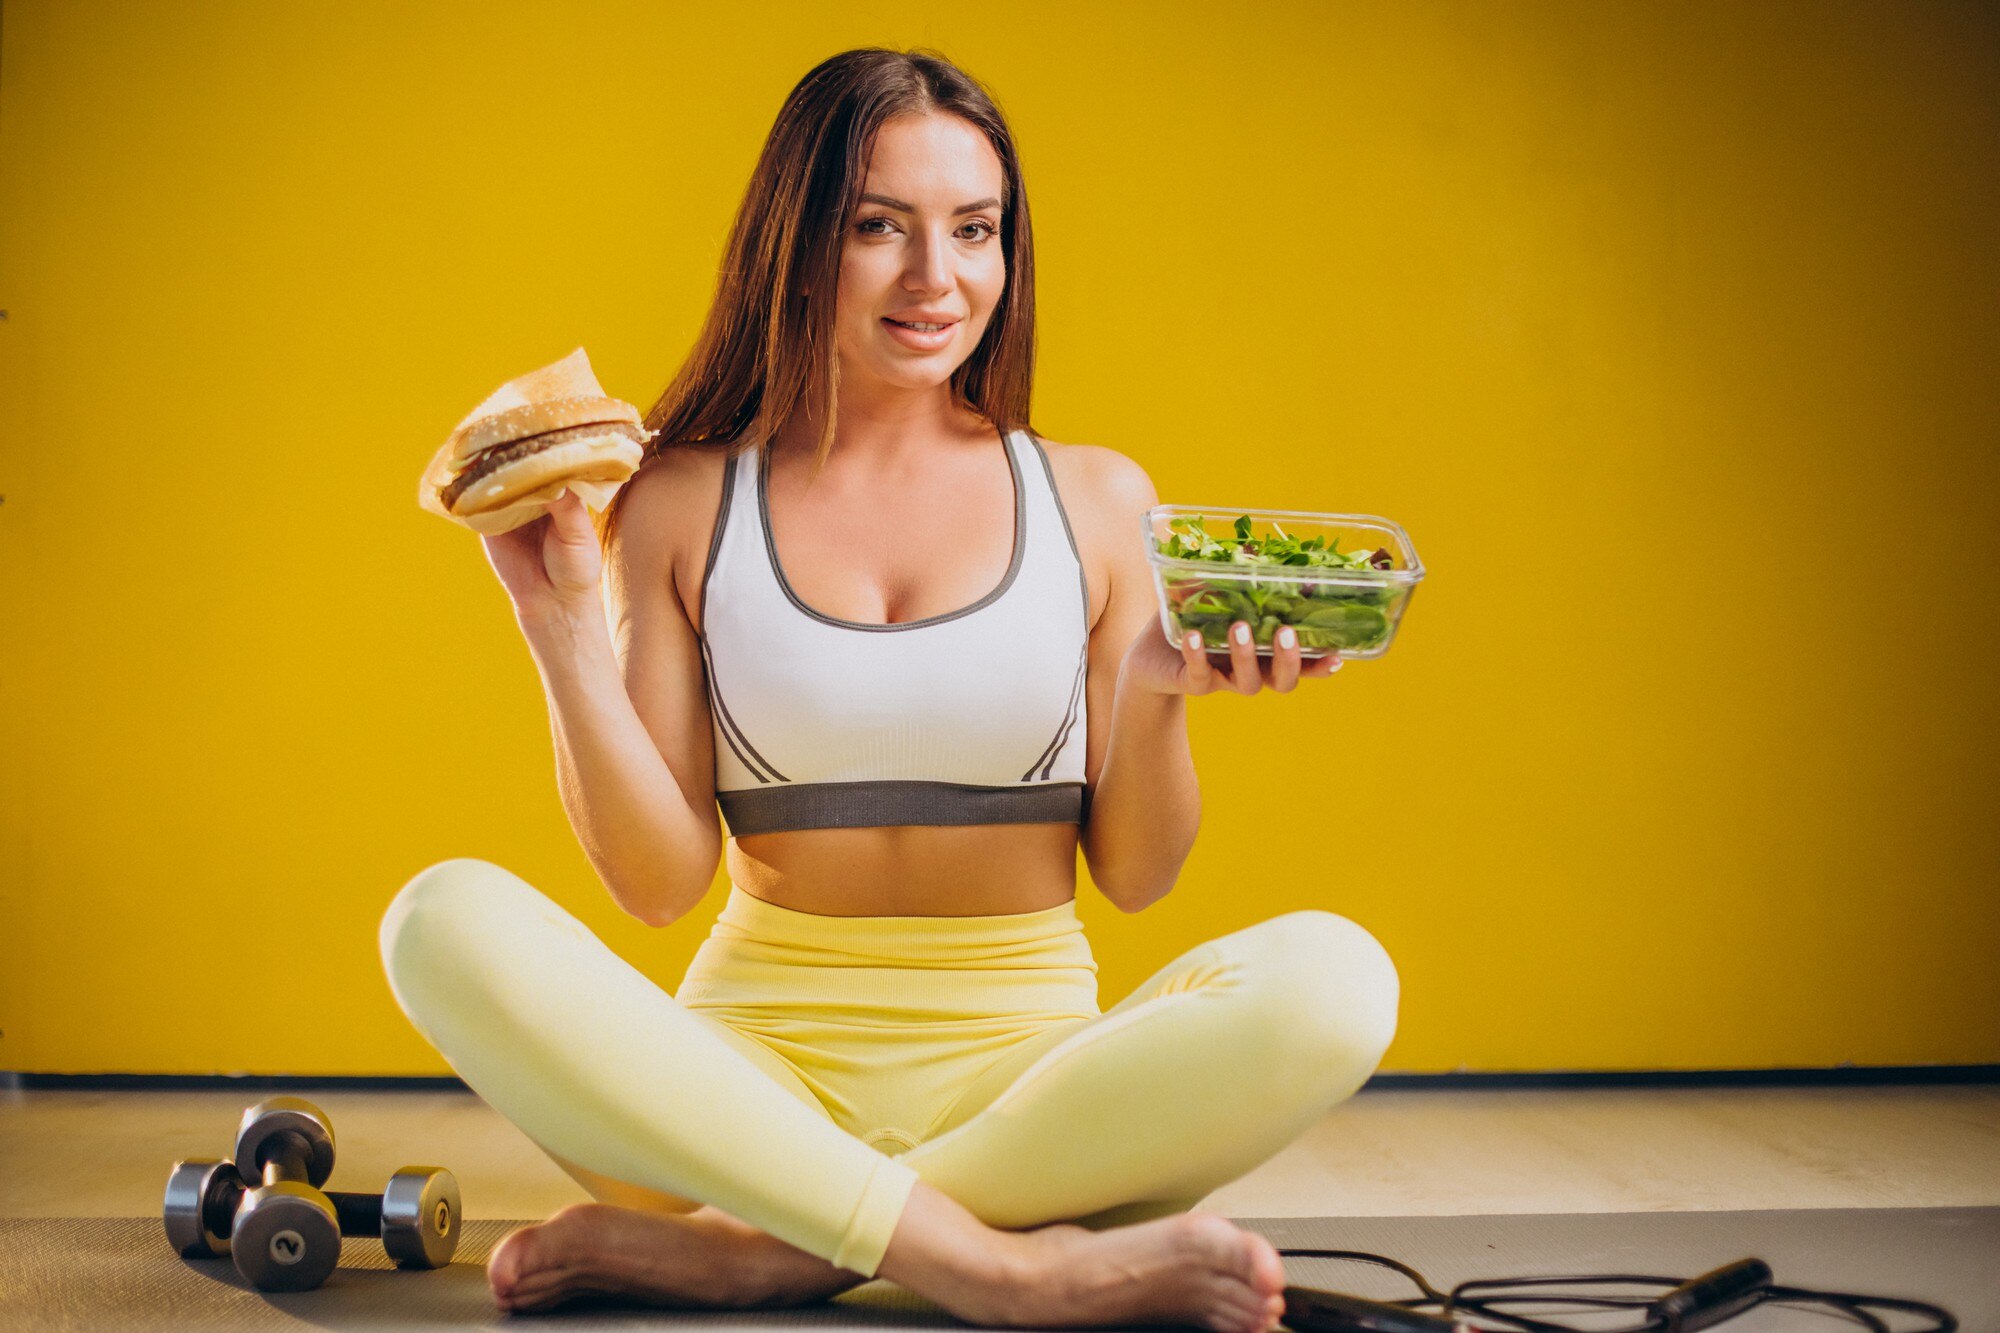 woman-eating-salad-isolated-yellow-background_1303-27054.jpg